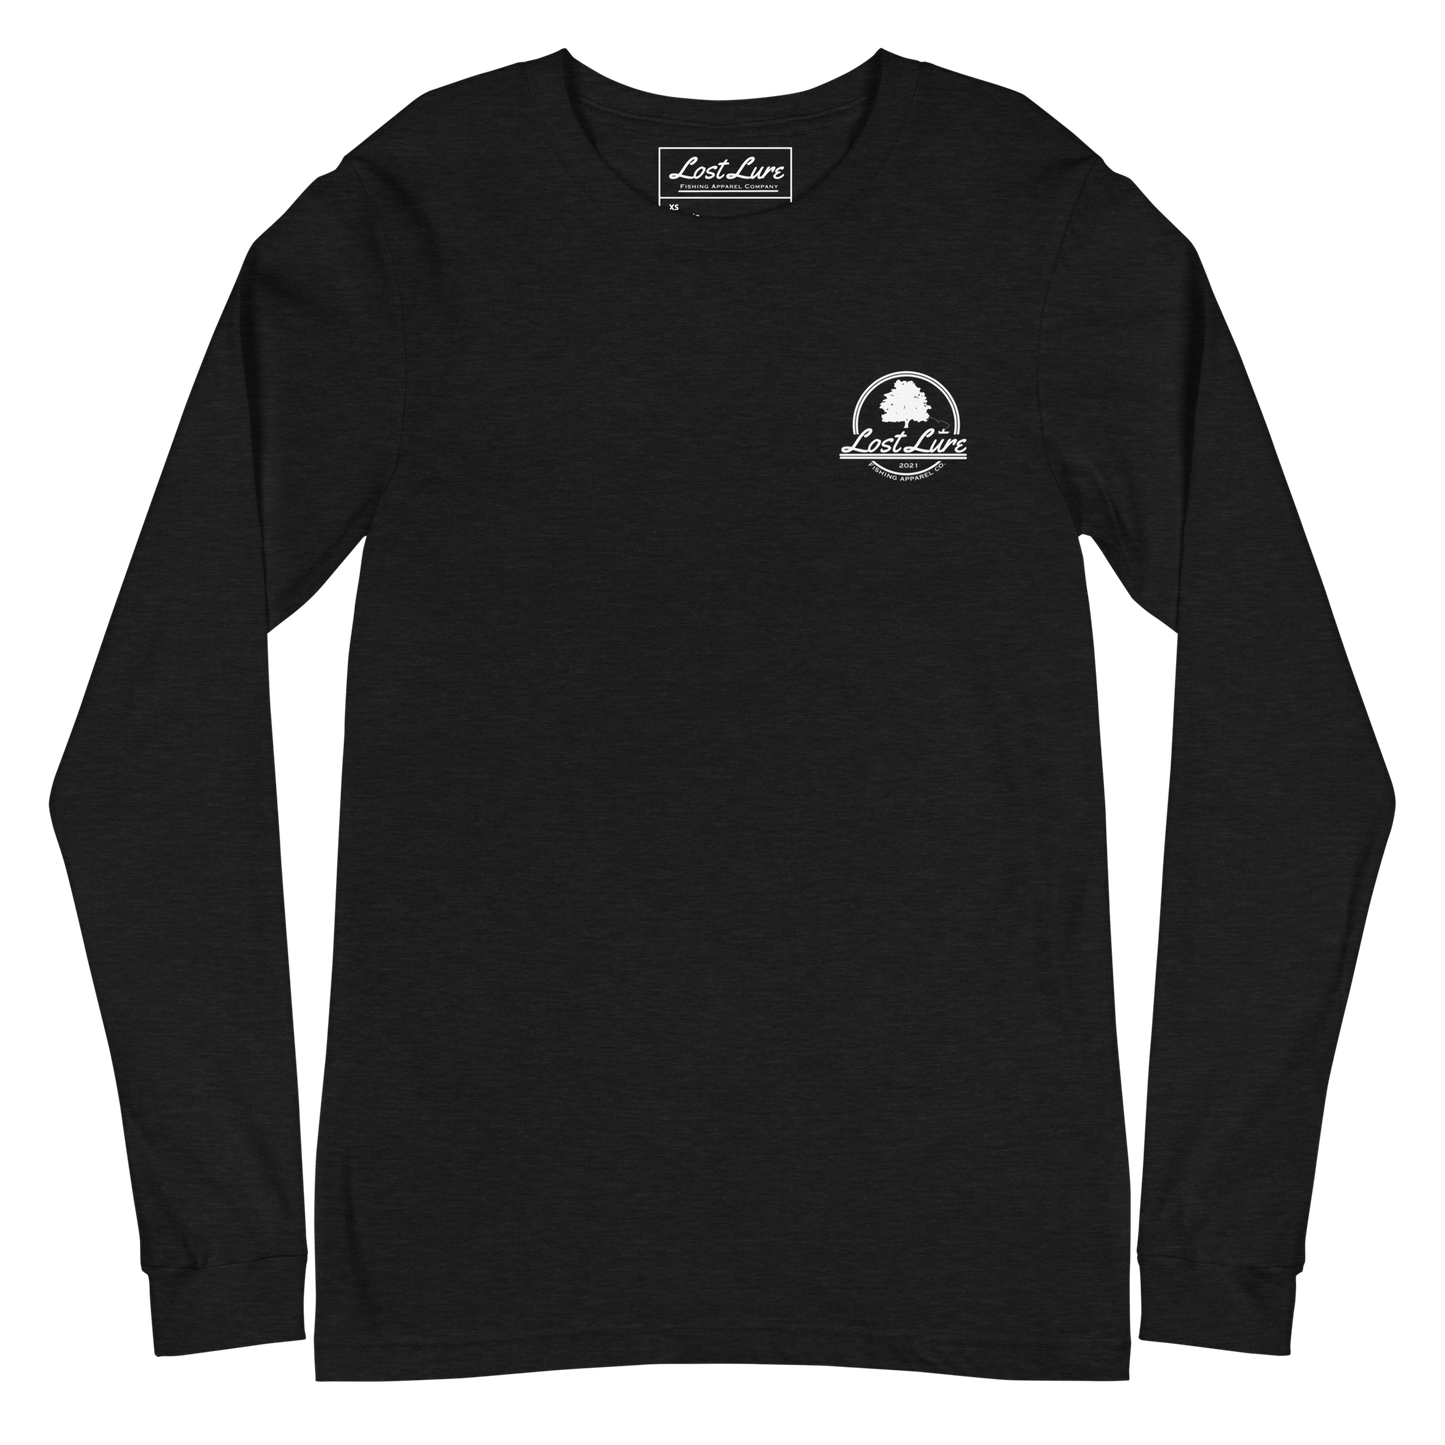 Fly fishing Lost lure long sleeve shirt. It has a design on the back of the shirt black and white outline a fly fisherman and the Rocky Mountains. Black fishing shirt, front side 